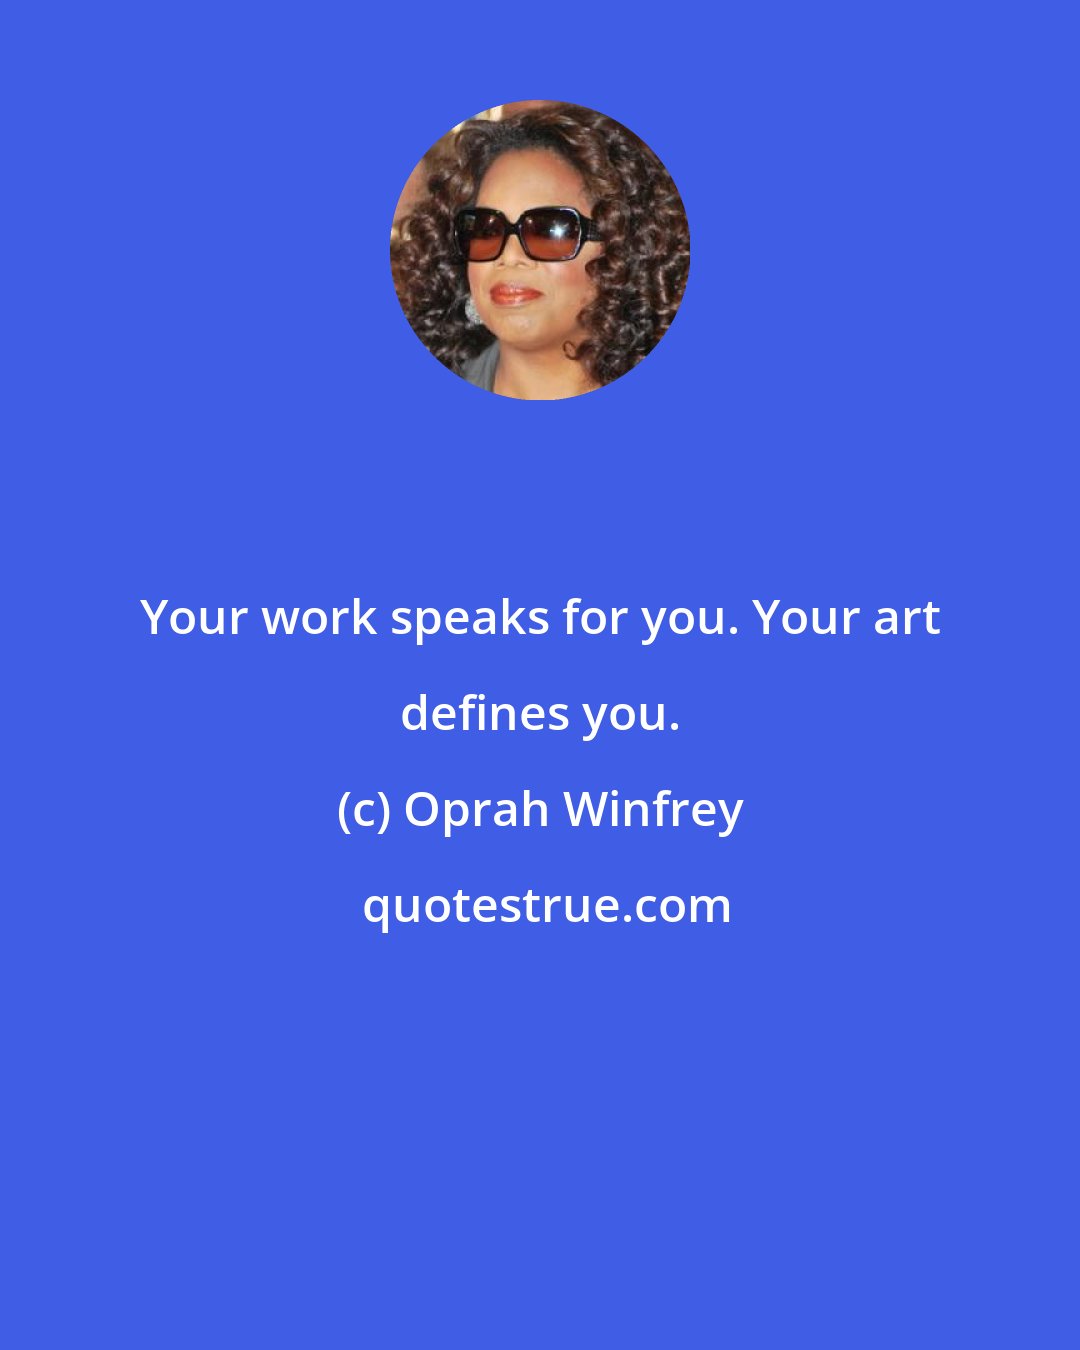 Oprah Winfrey: Your work speaks for you. Your art defines you.